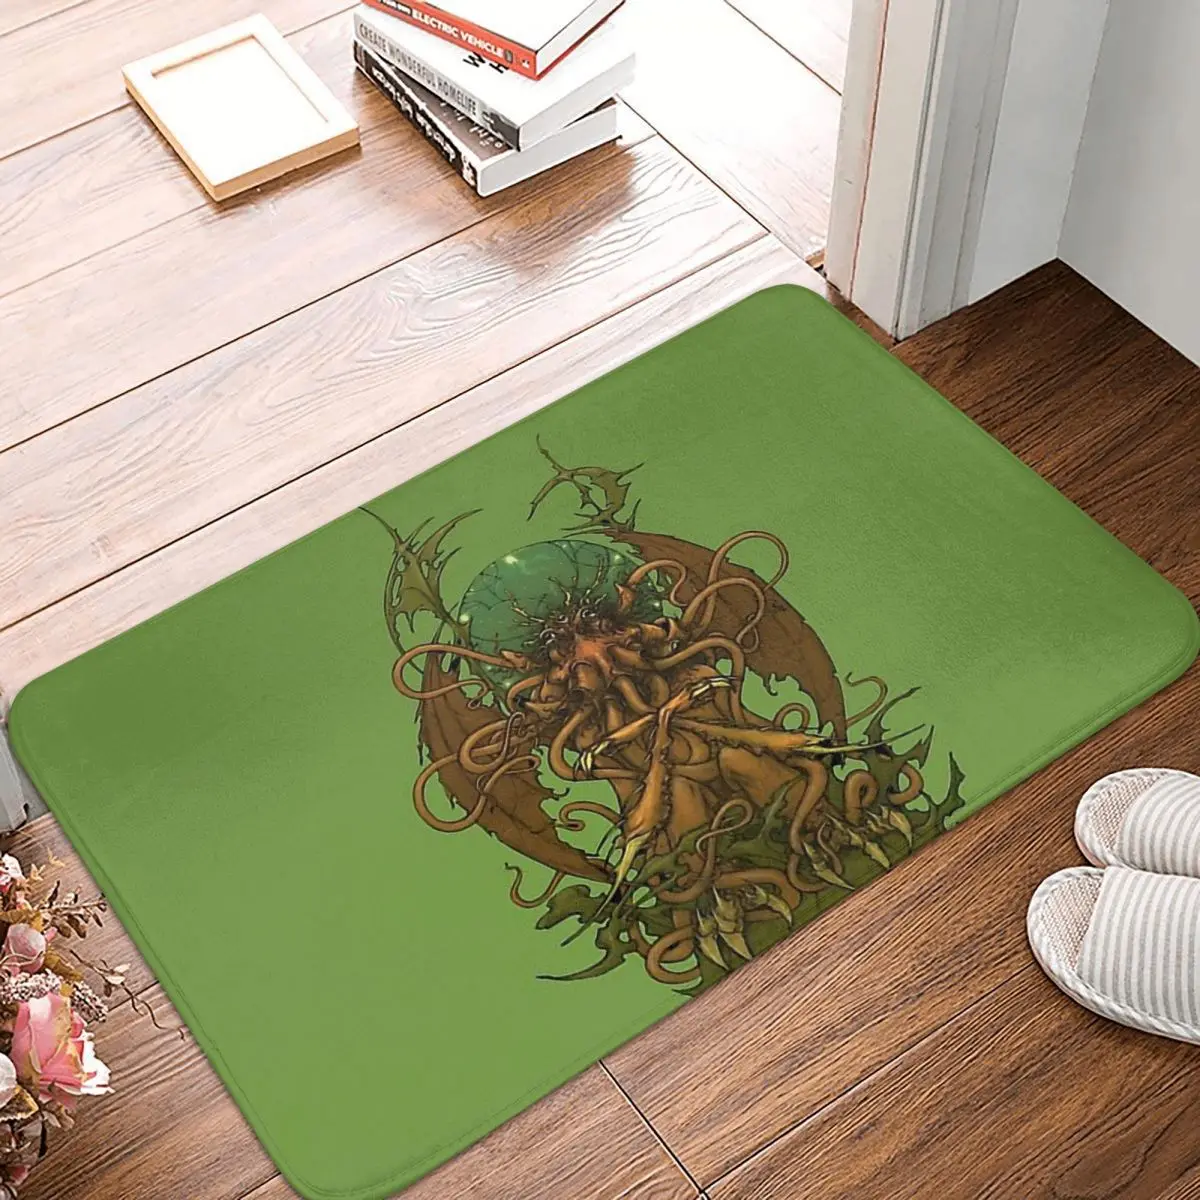 

The Call of Cthulhu Non-slip Doormat Tom Brown Bath Bedroom Mat Welcome Carpet Flannel Modern Decor